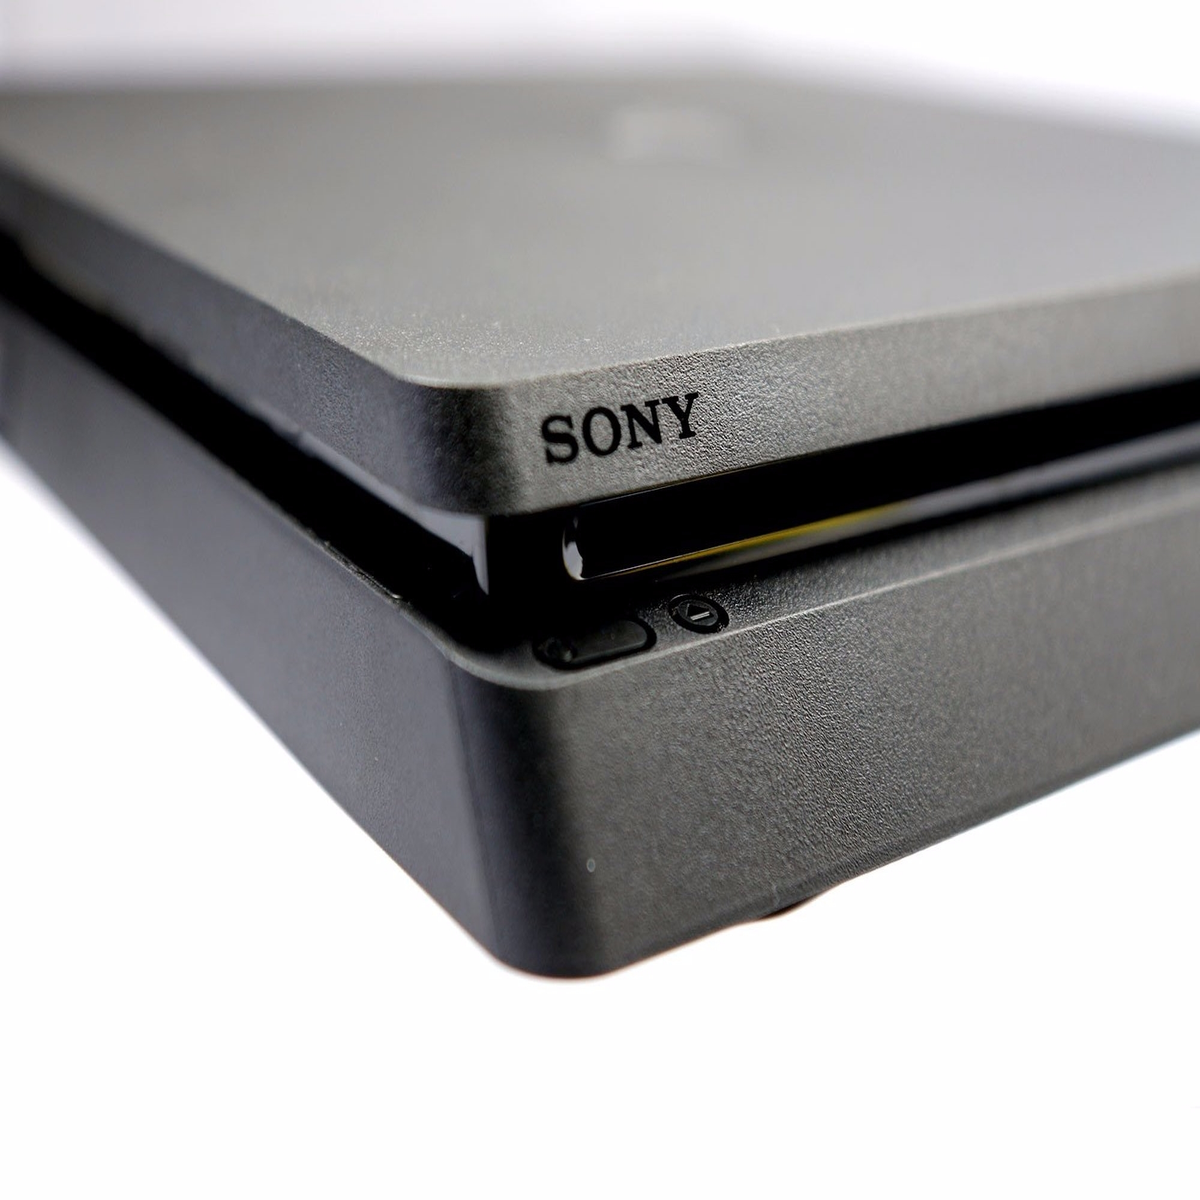 Digital Foundry: Hands-on with the CUH-2000 PS4 Slim |